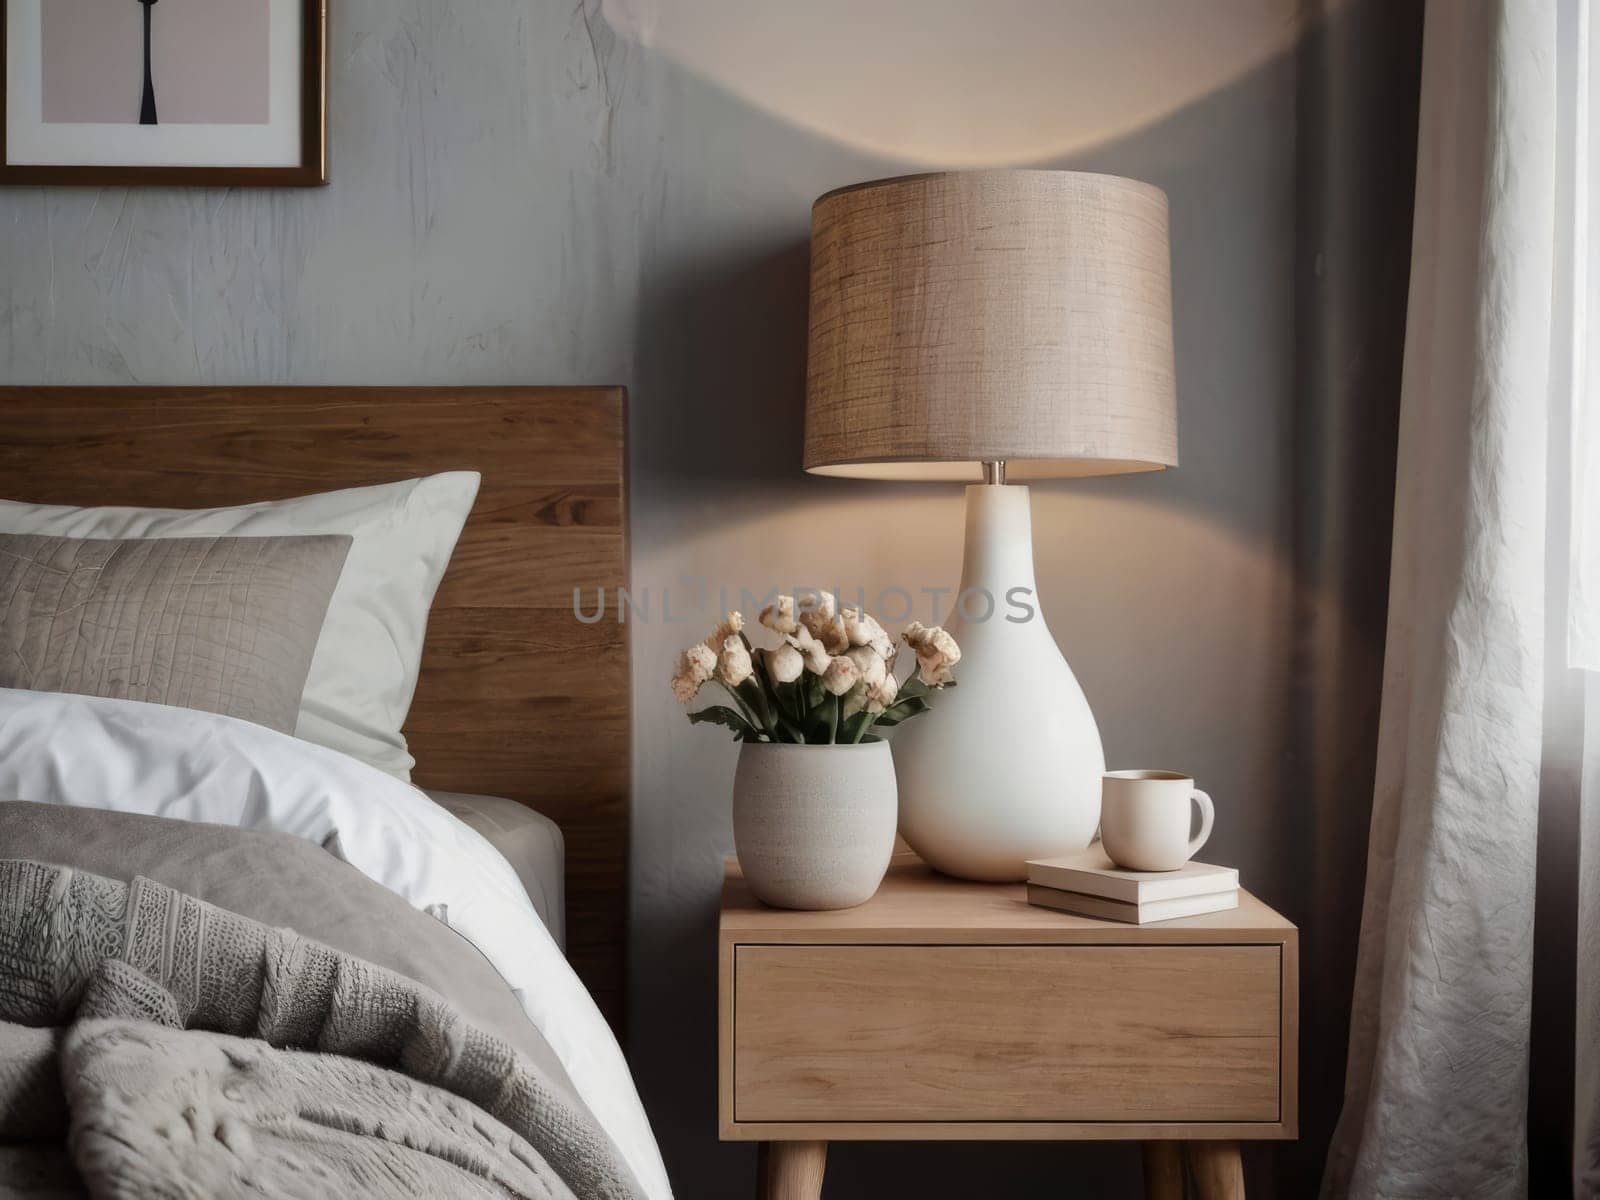 Charming bedside table arrangement with a lamp and blooming flowers, enhancing the serene ambiance of the Scandinavian-style bedroom